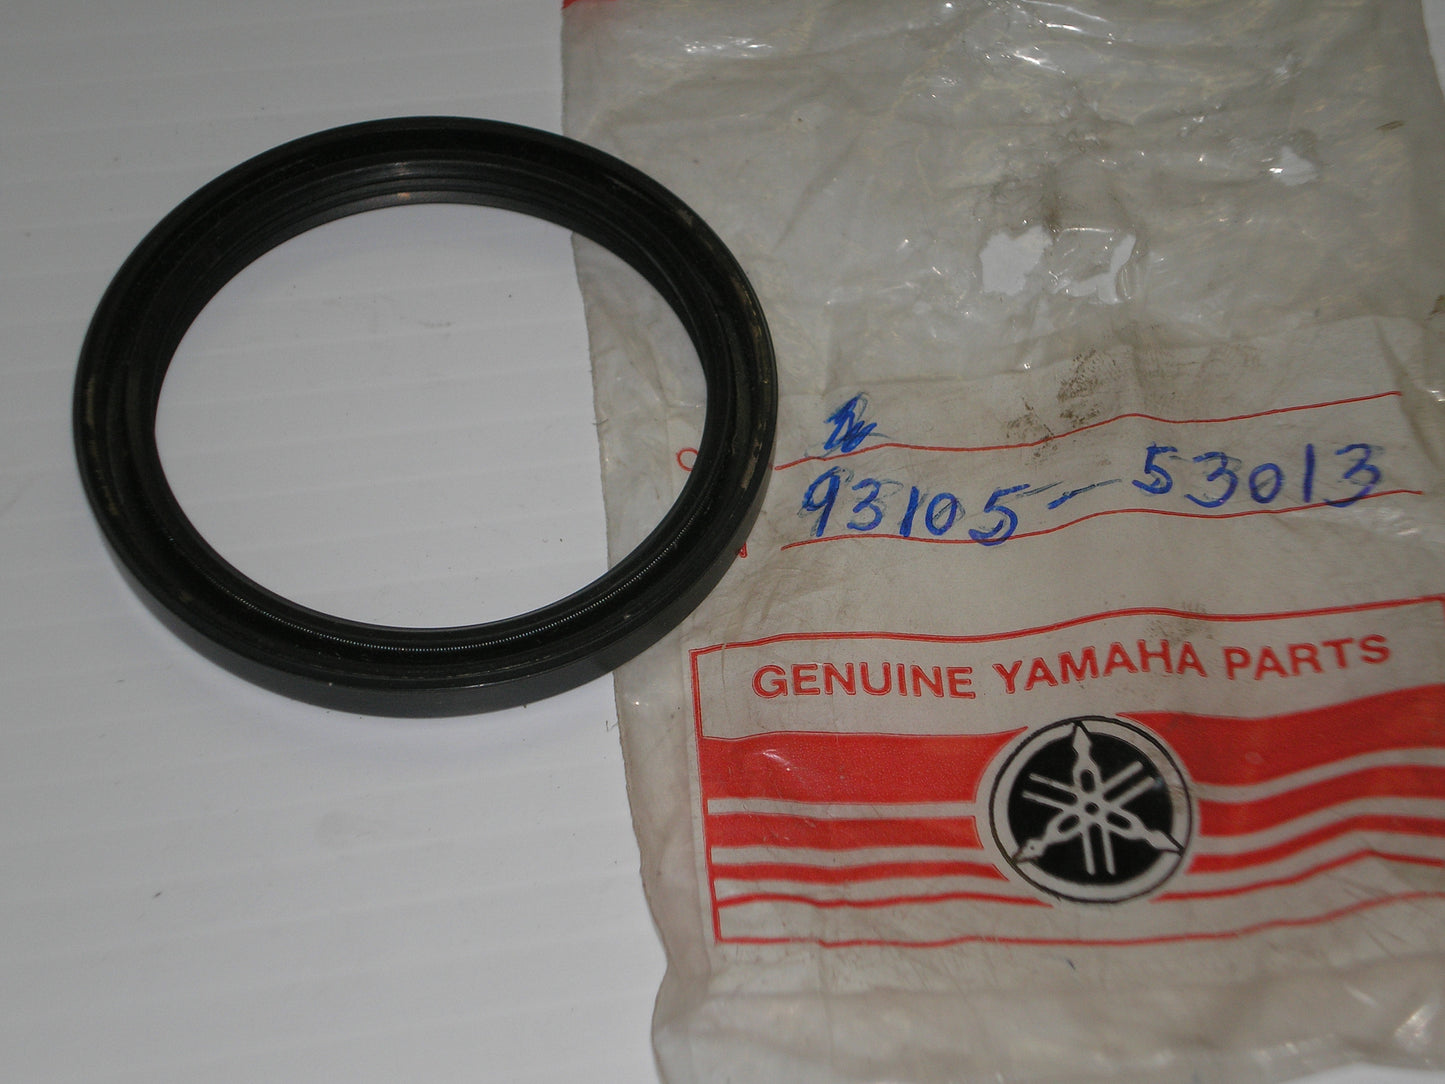 YAMAHA CS5 DS6 DS7 R5 RD200 RD250 XS360 XS400 Front Wheel Bearing Oil Seal  93105-53013